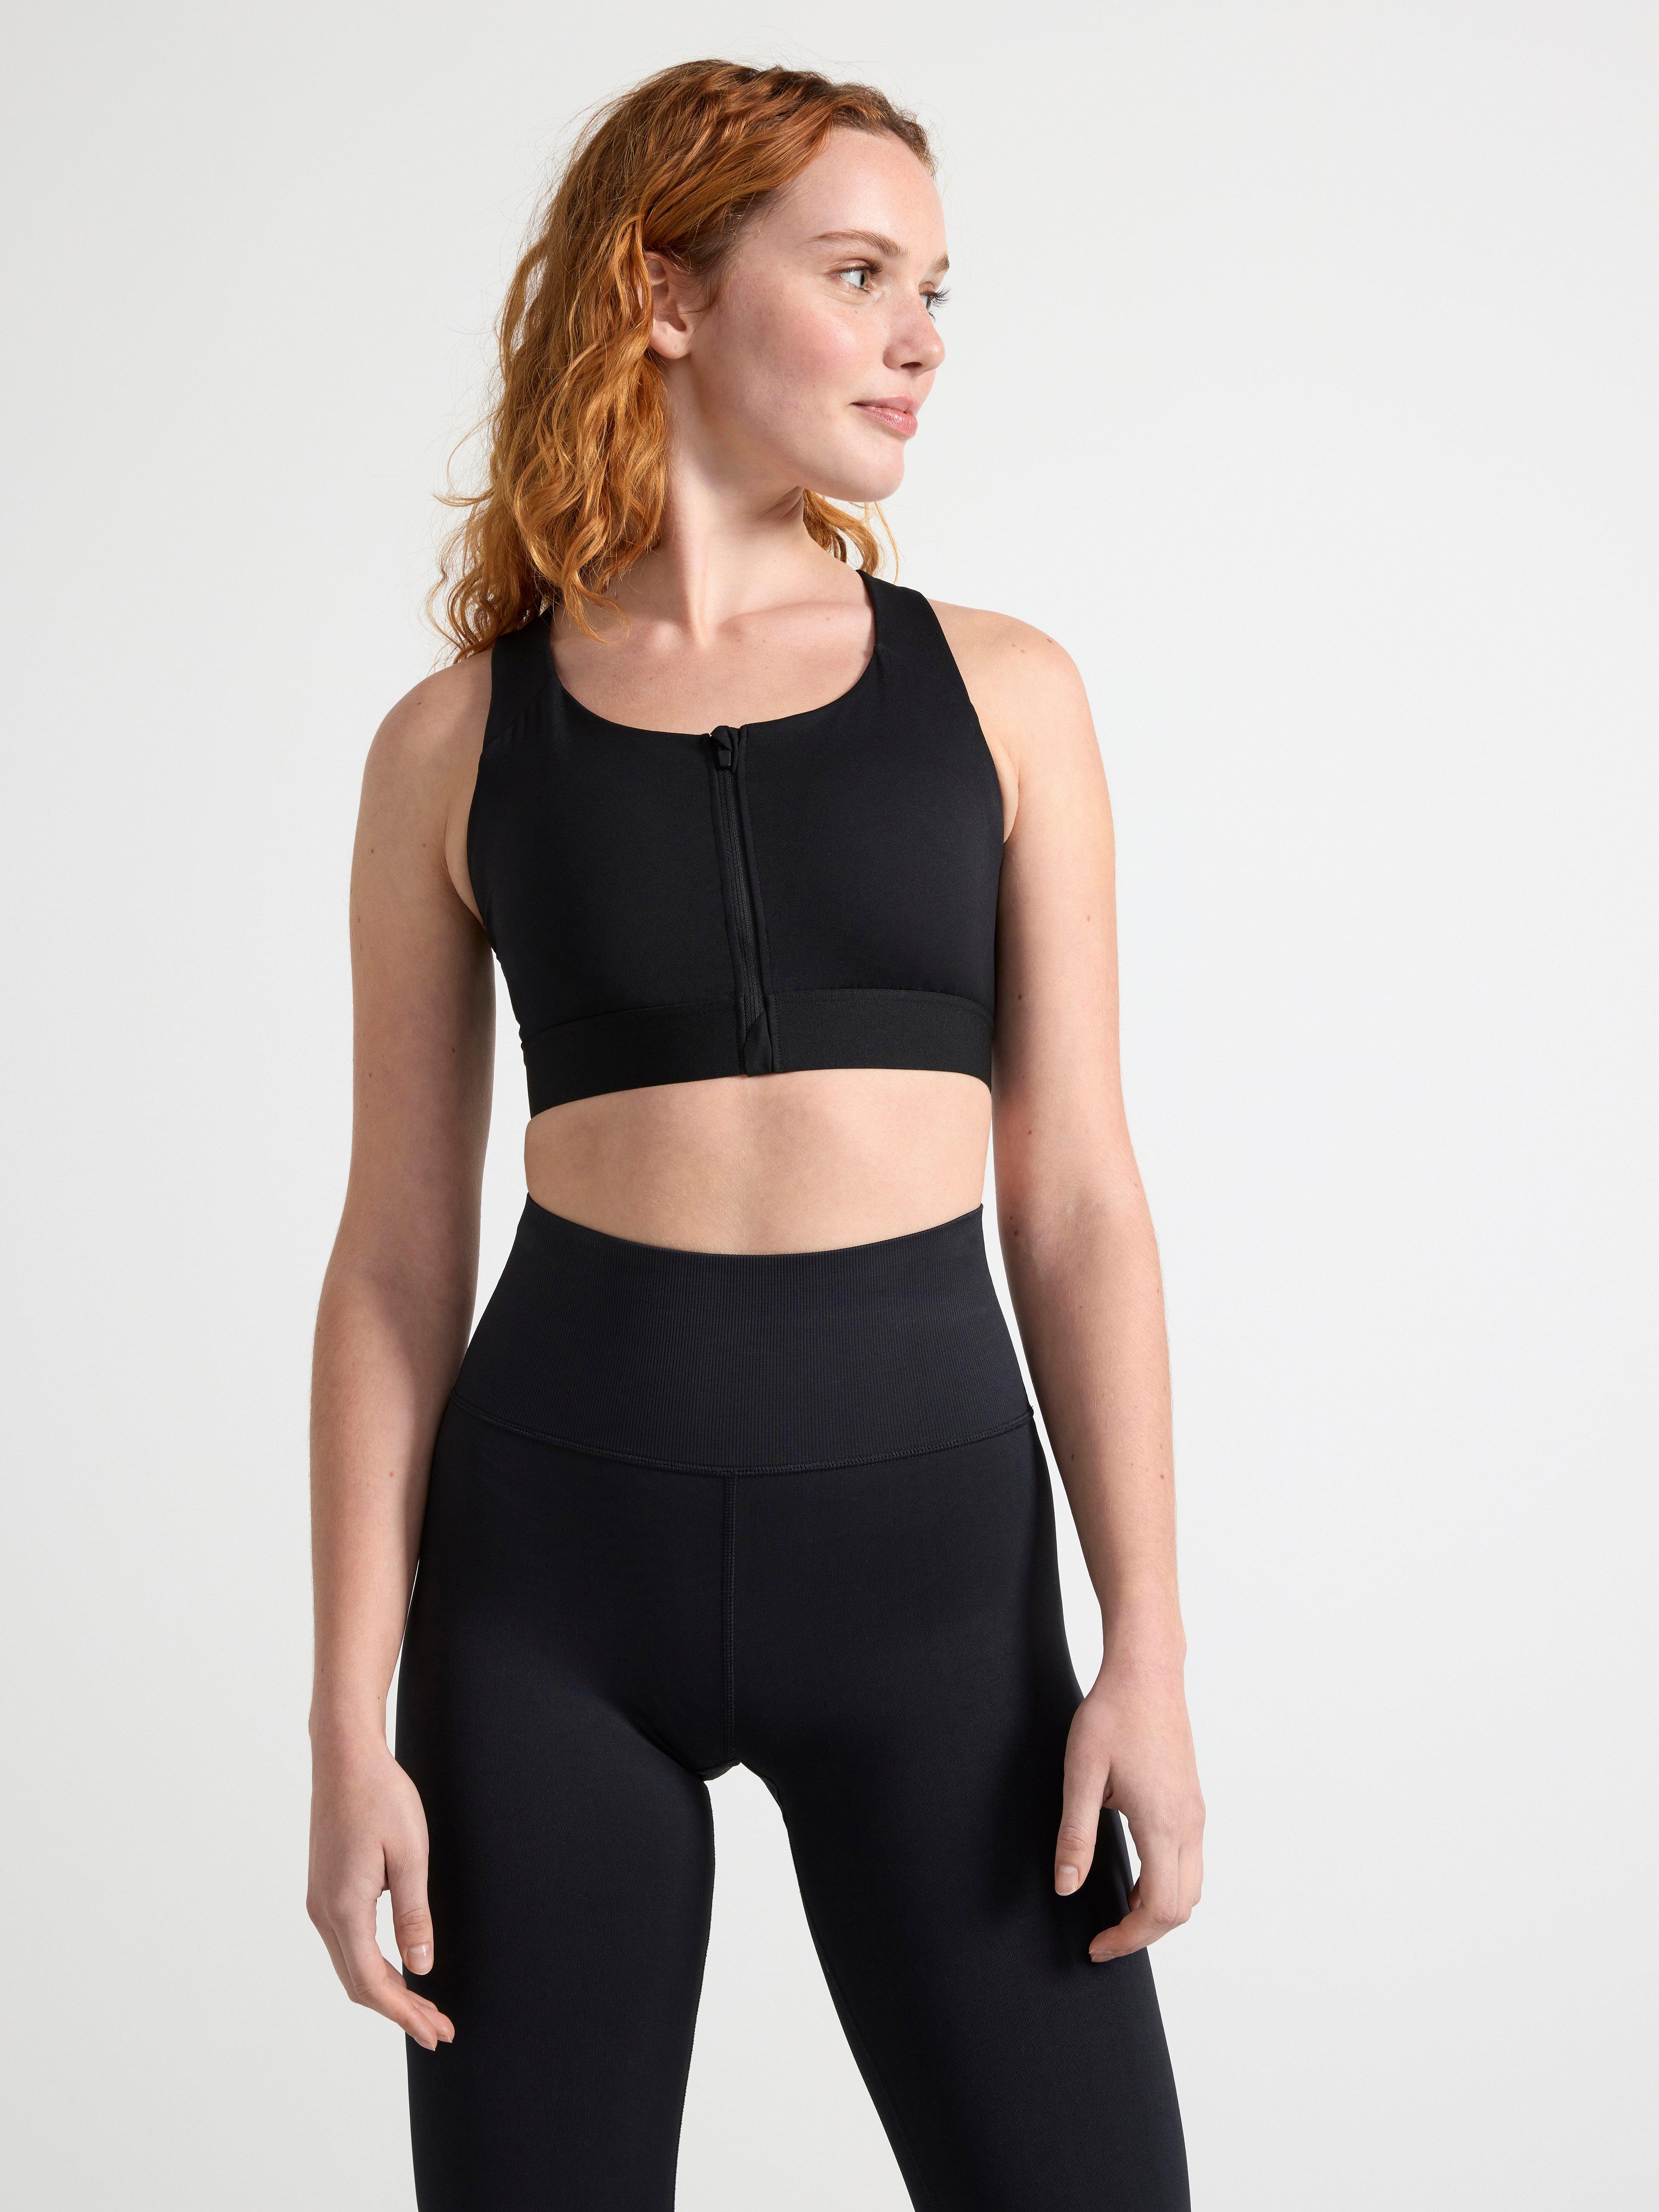 The High Support sports bra – Closely